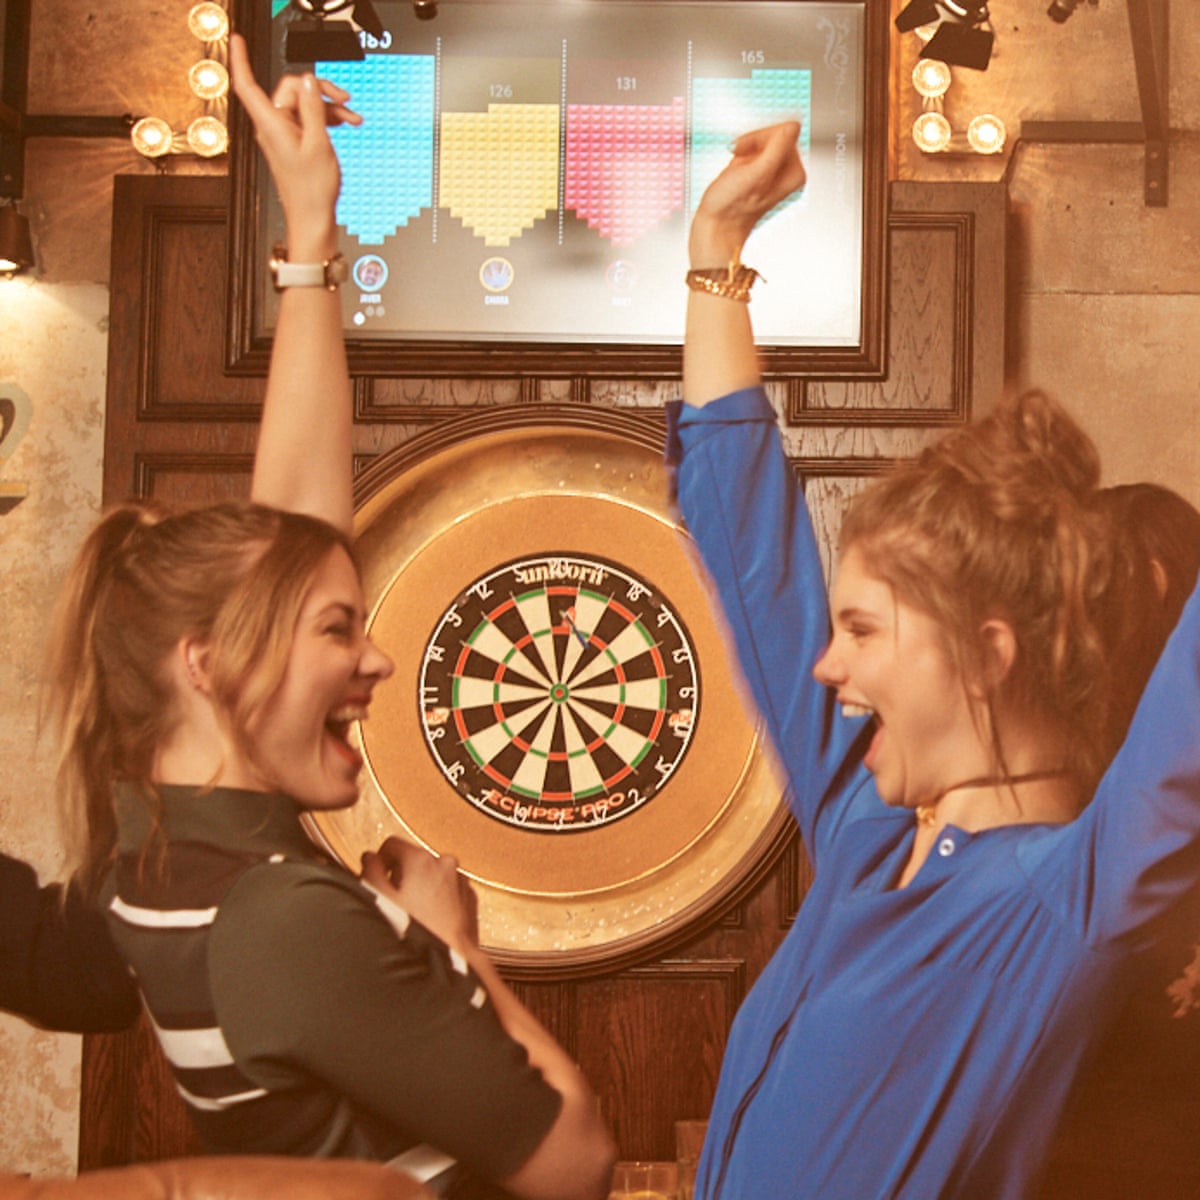 Dart Bar Near Me Throws of despair: are hipster bars ruining darts? | Cities | The Guardian